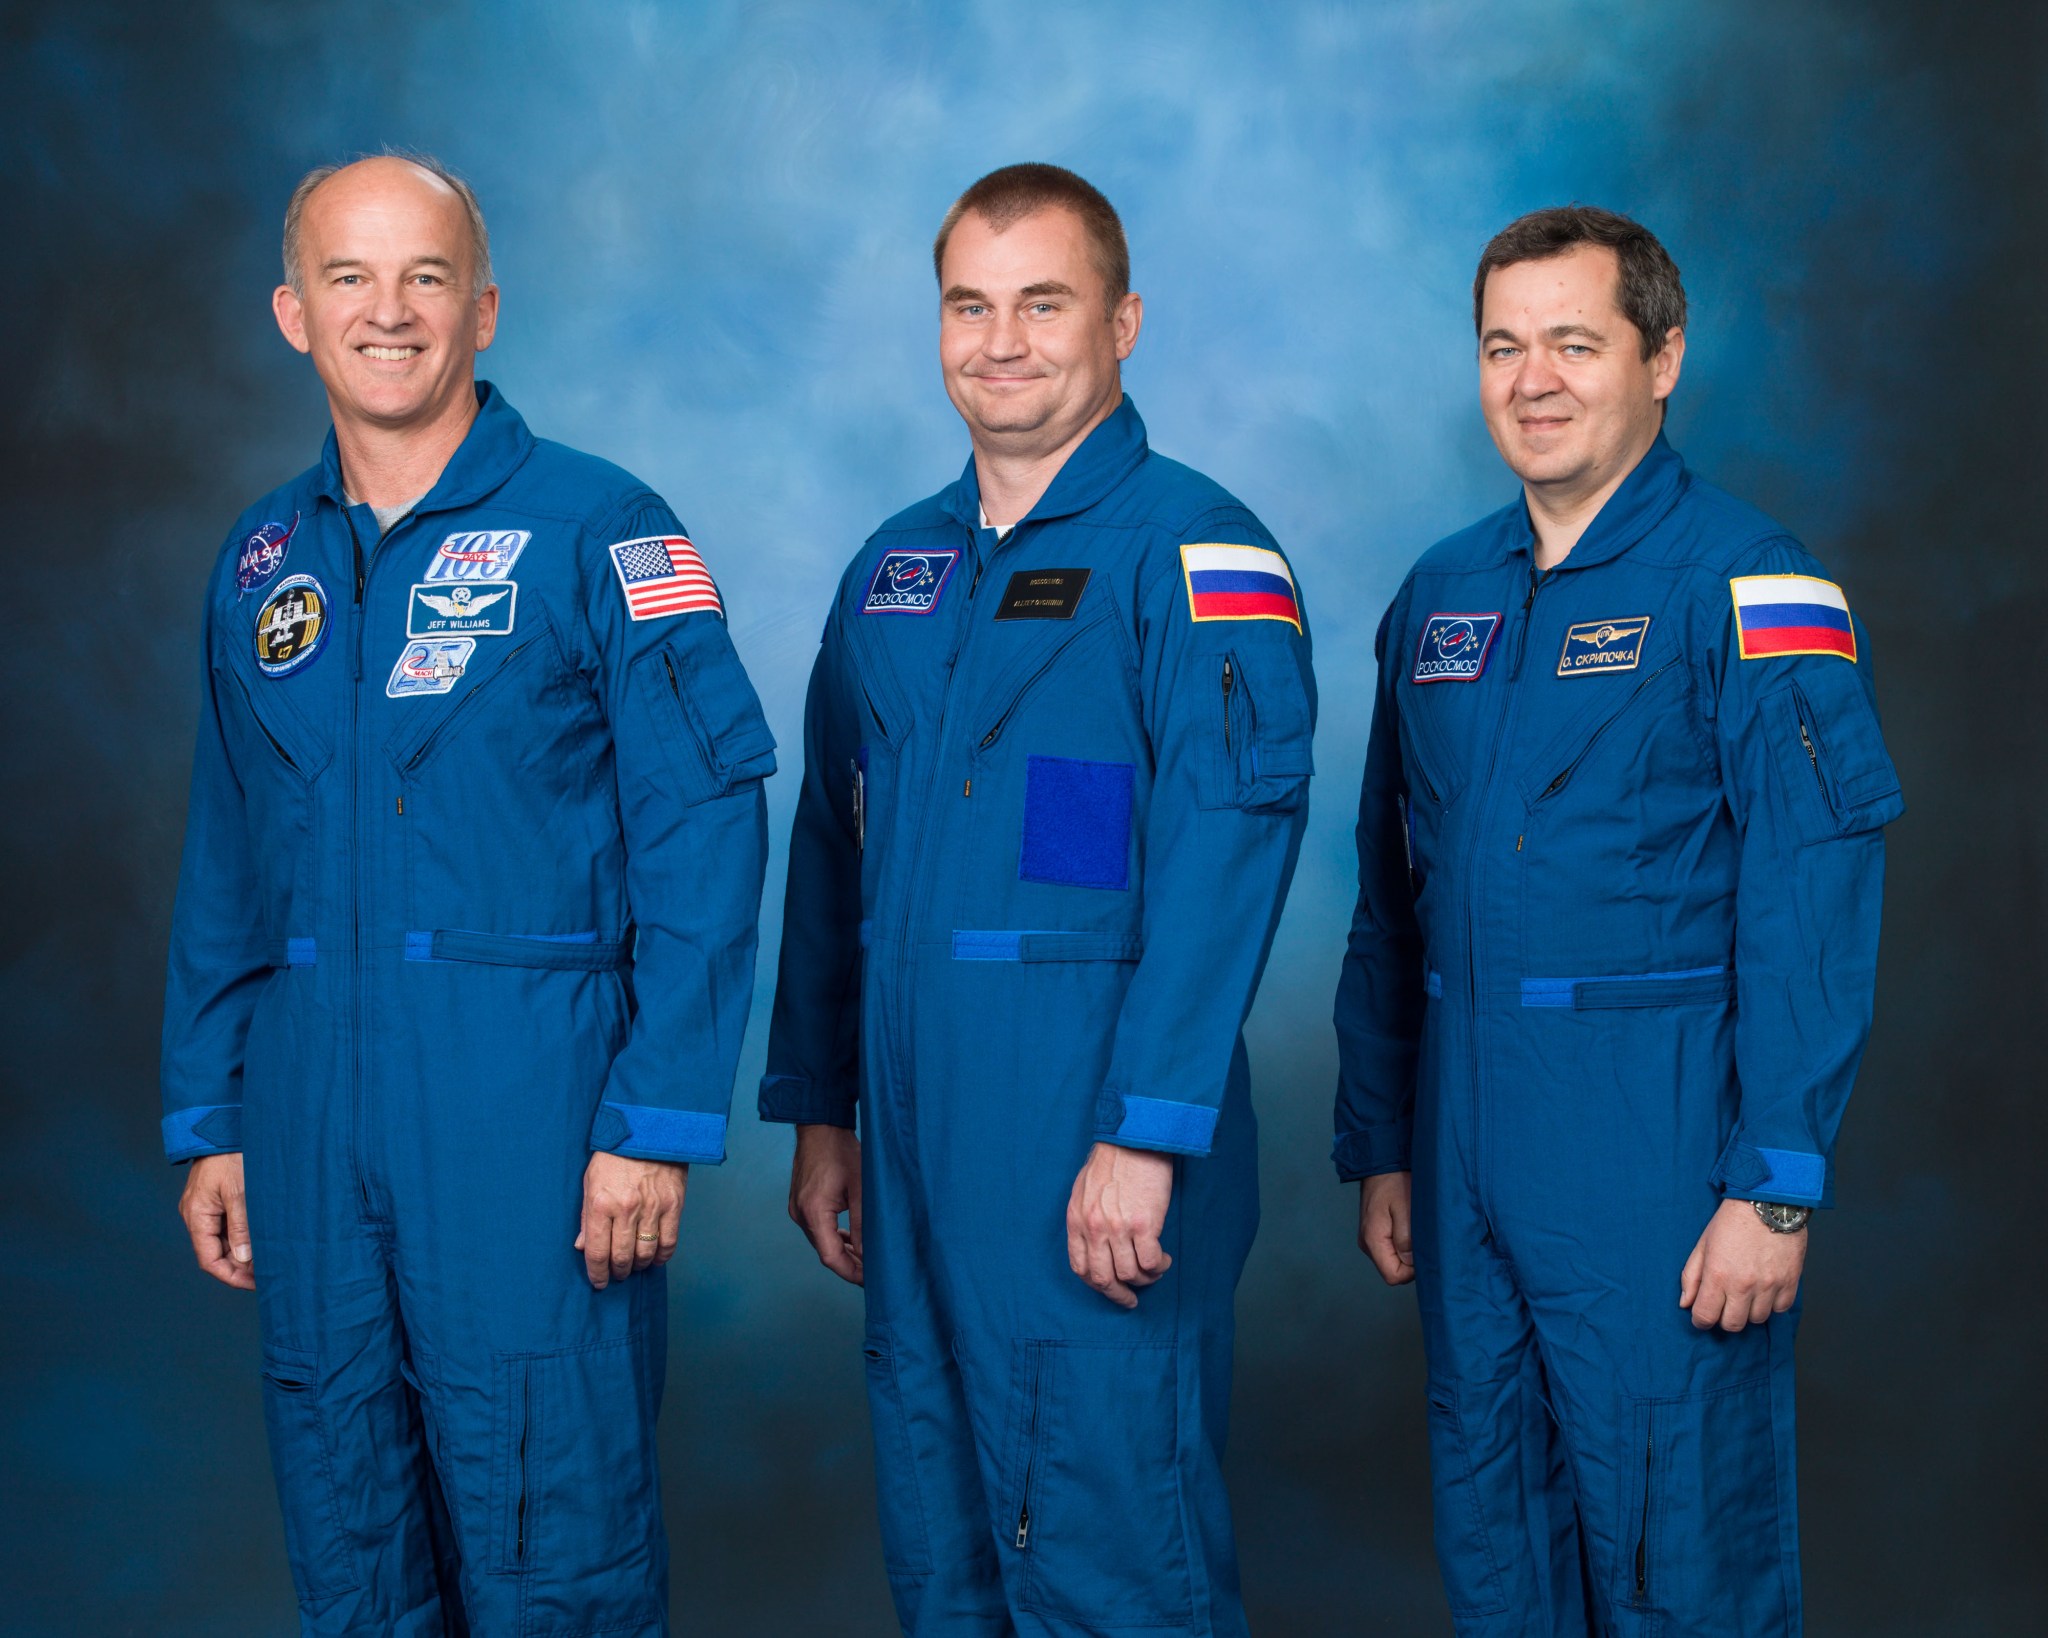 Expedition 47